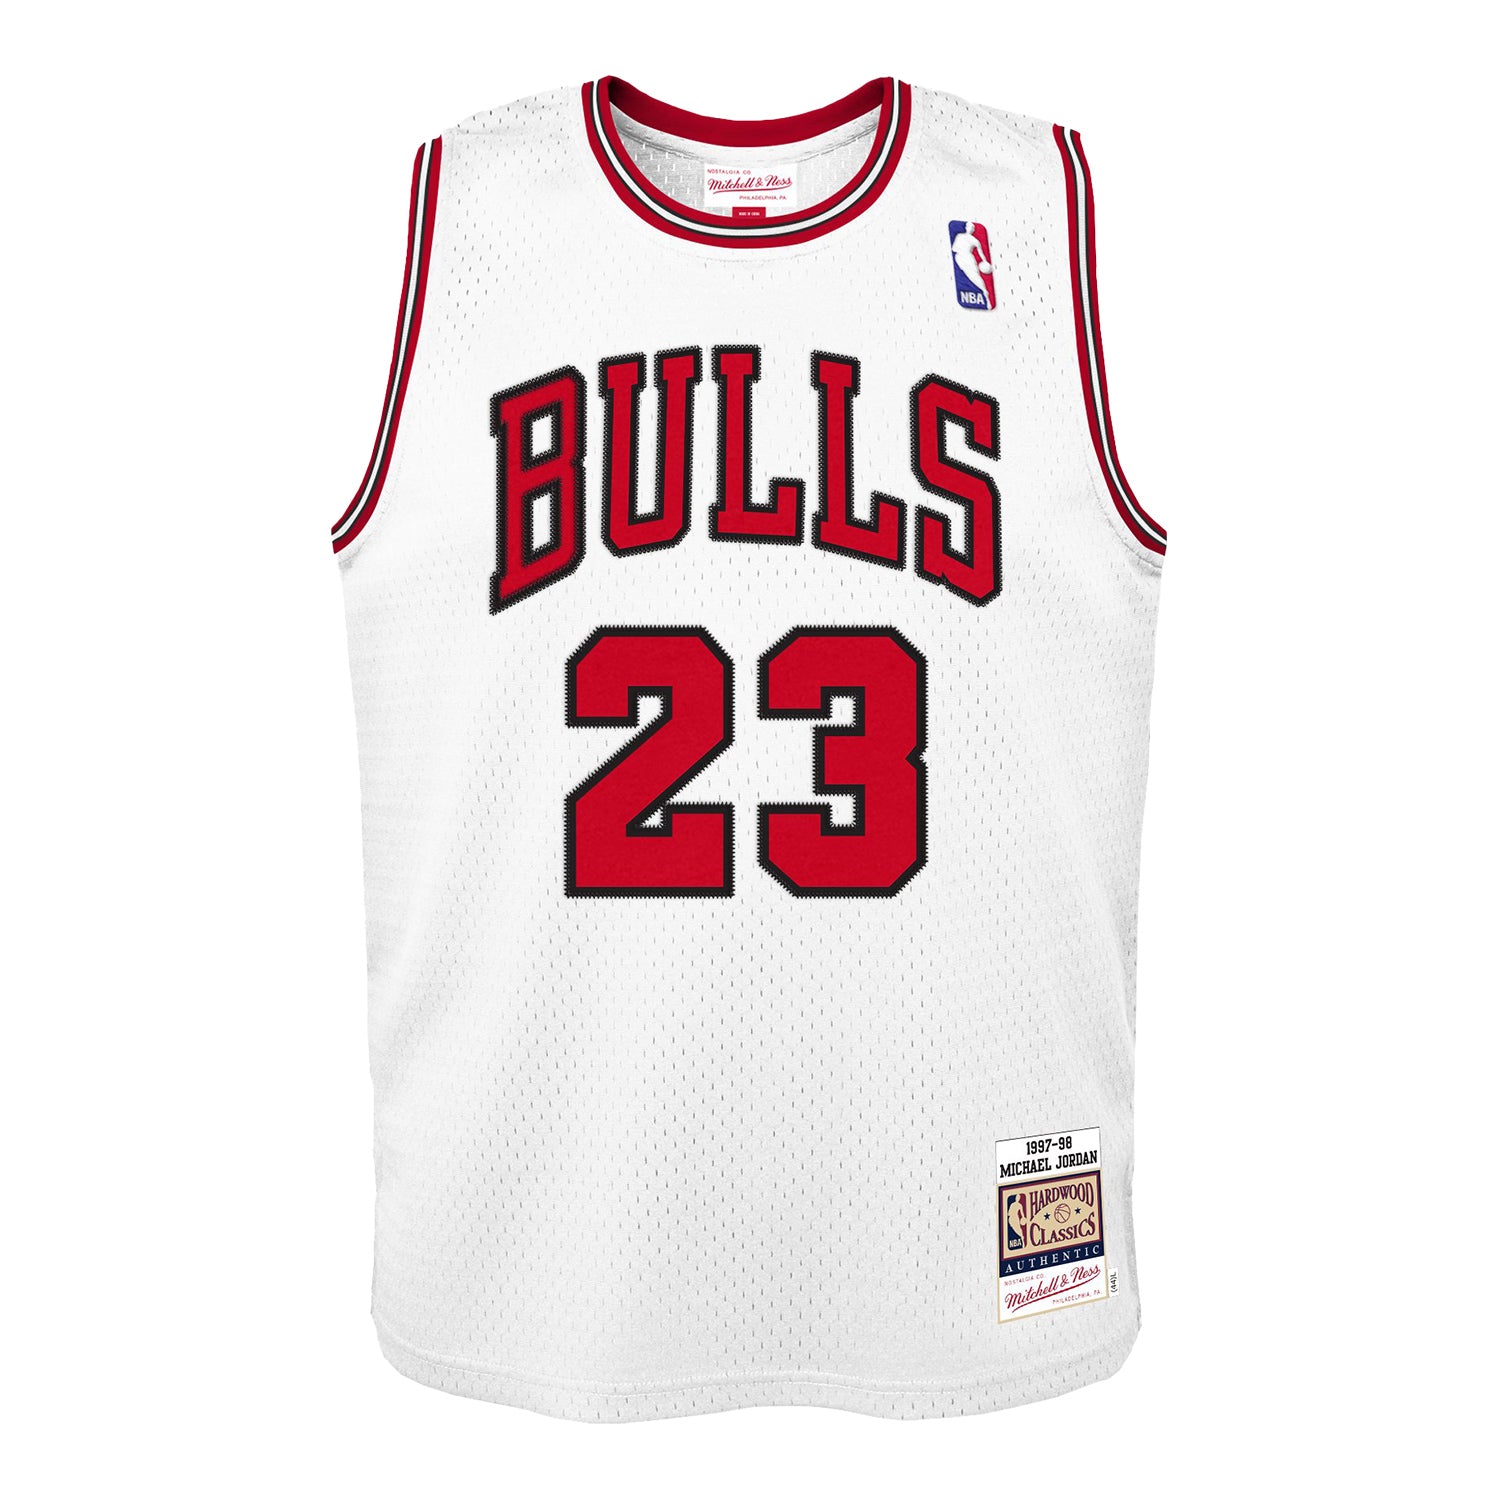 Youth Chicago Bulls Authentic Mitchell & Ness Michael Jordan 1997-98 Jersey - front view